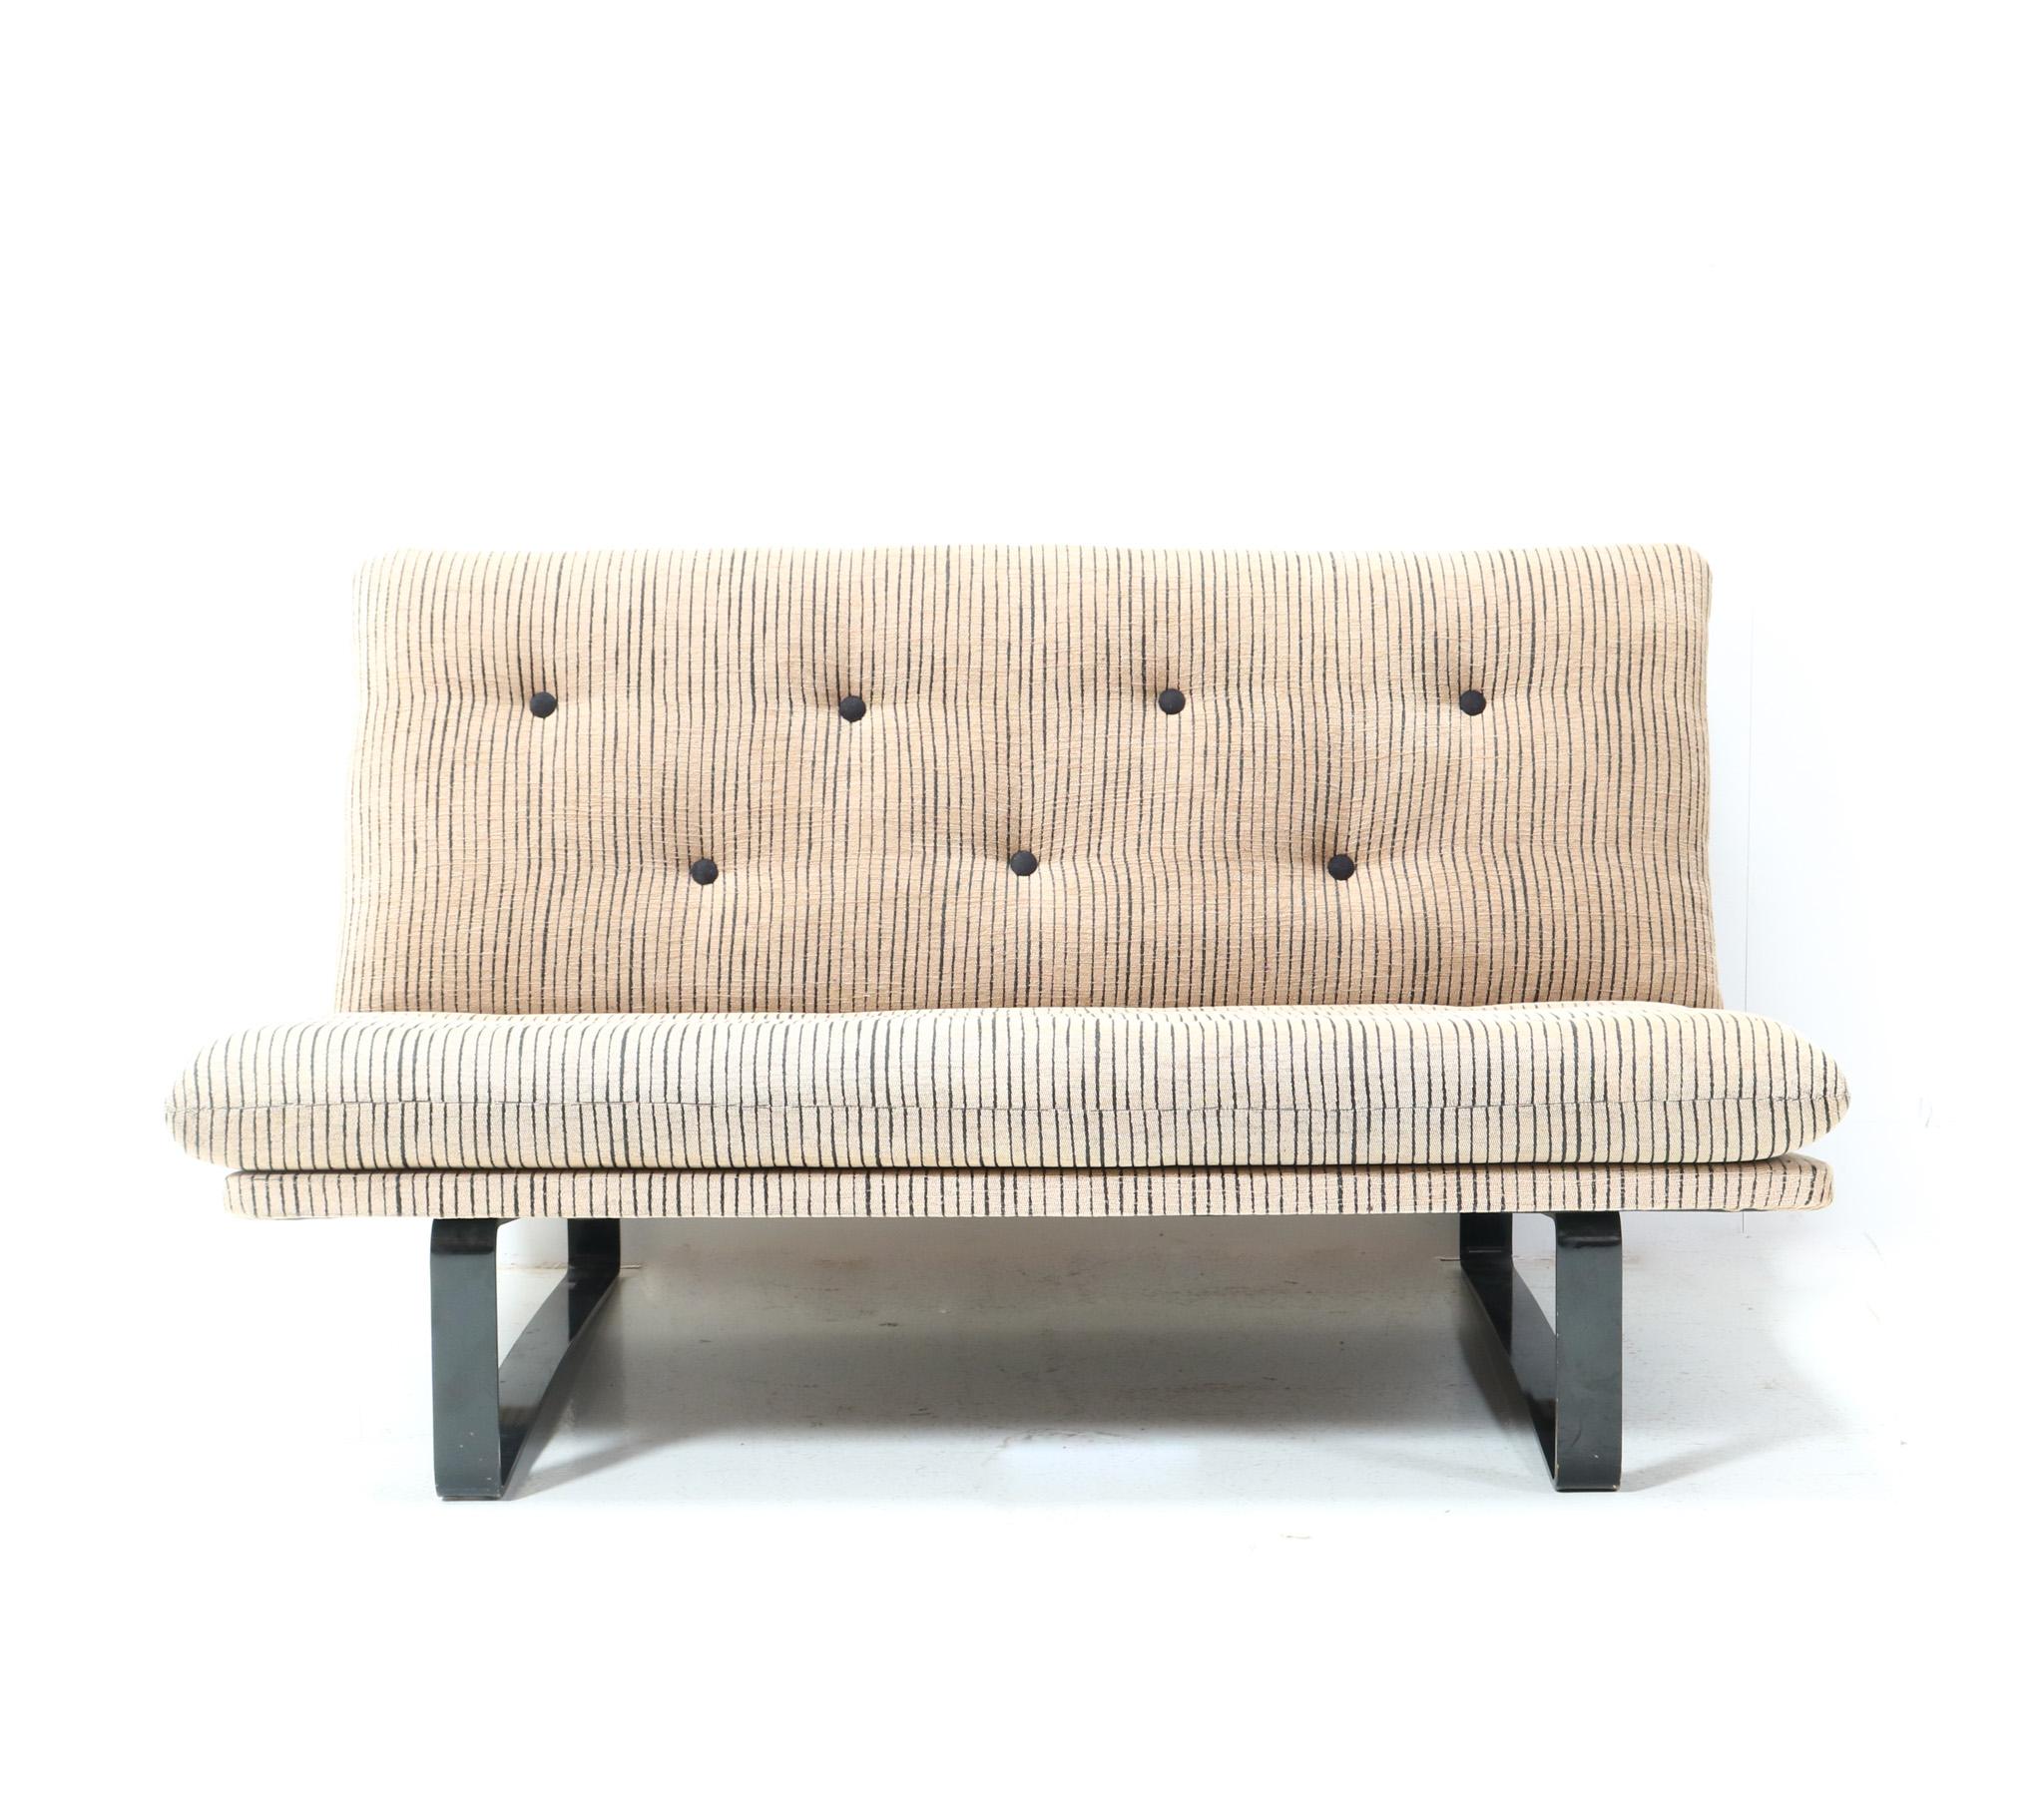 Stunning Mid-Century Modern C683 two-seater sofa or settee.
Design by Kho Liang Le for Artifort.
Striking Dutch design from the 1960s.
Original black lacquered metal frame with original tufted upholstery.
This wonderful Mid-Century Modern C683